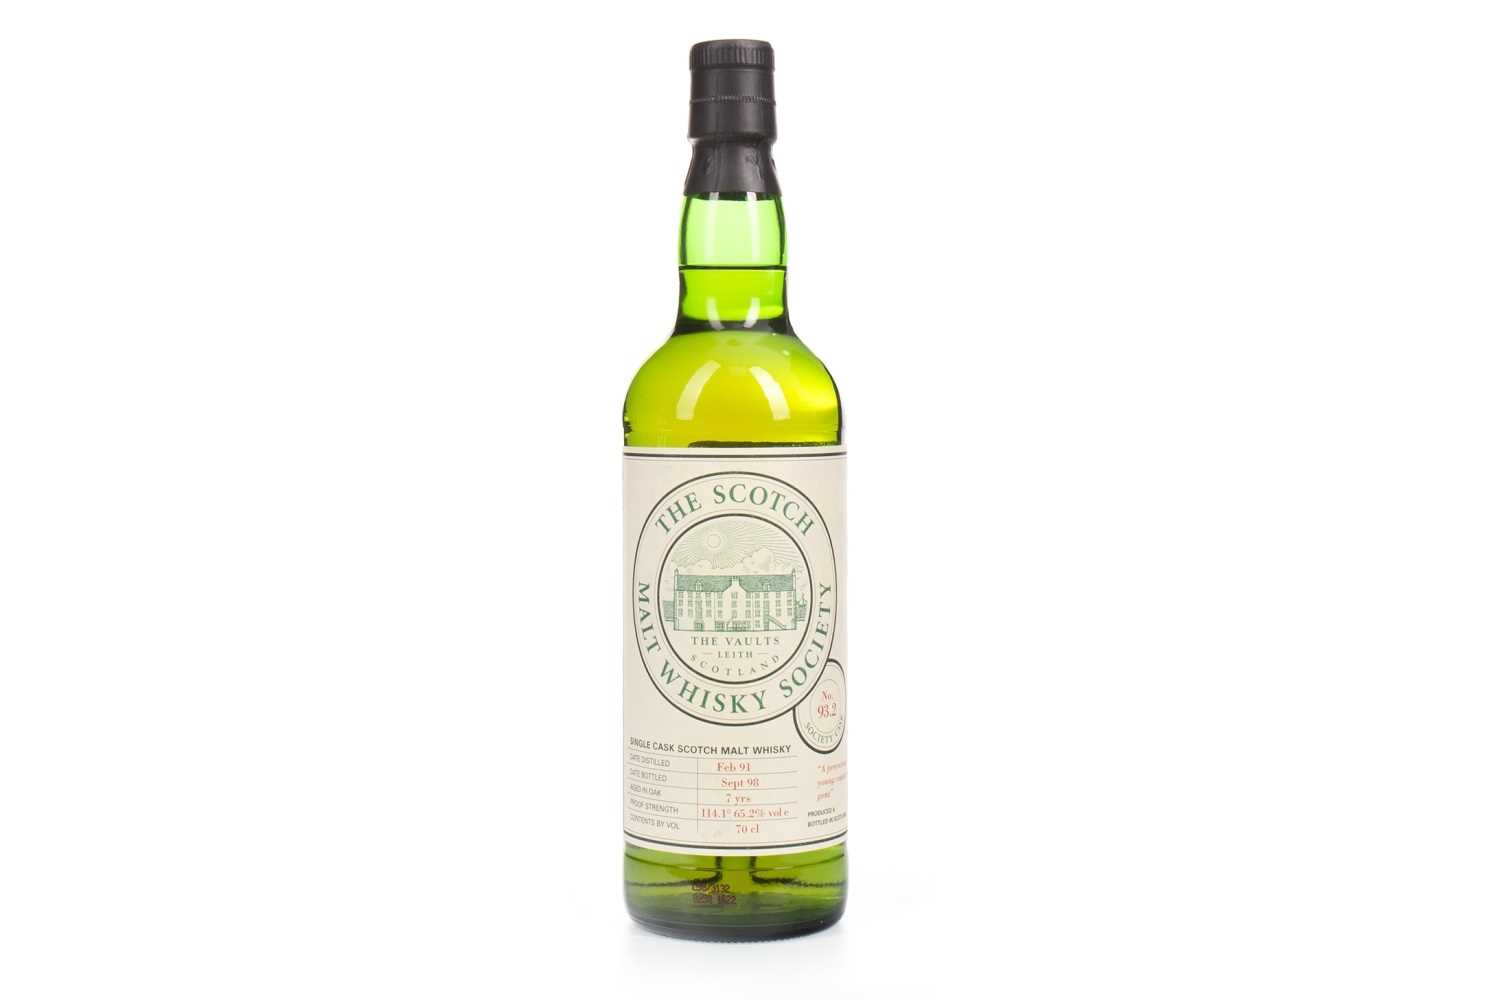 Lot 200 - GLEN SCOTIA 1991 SMWS 93.2 AGED 7 YEARS